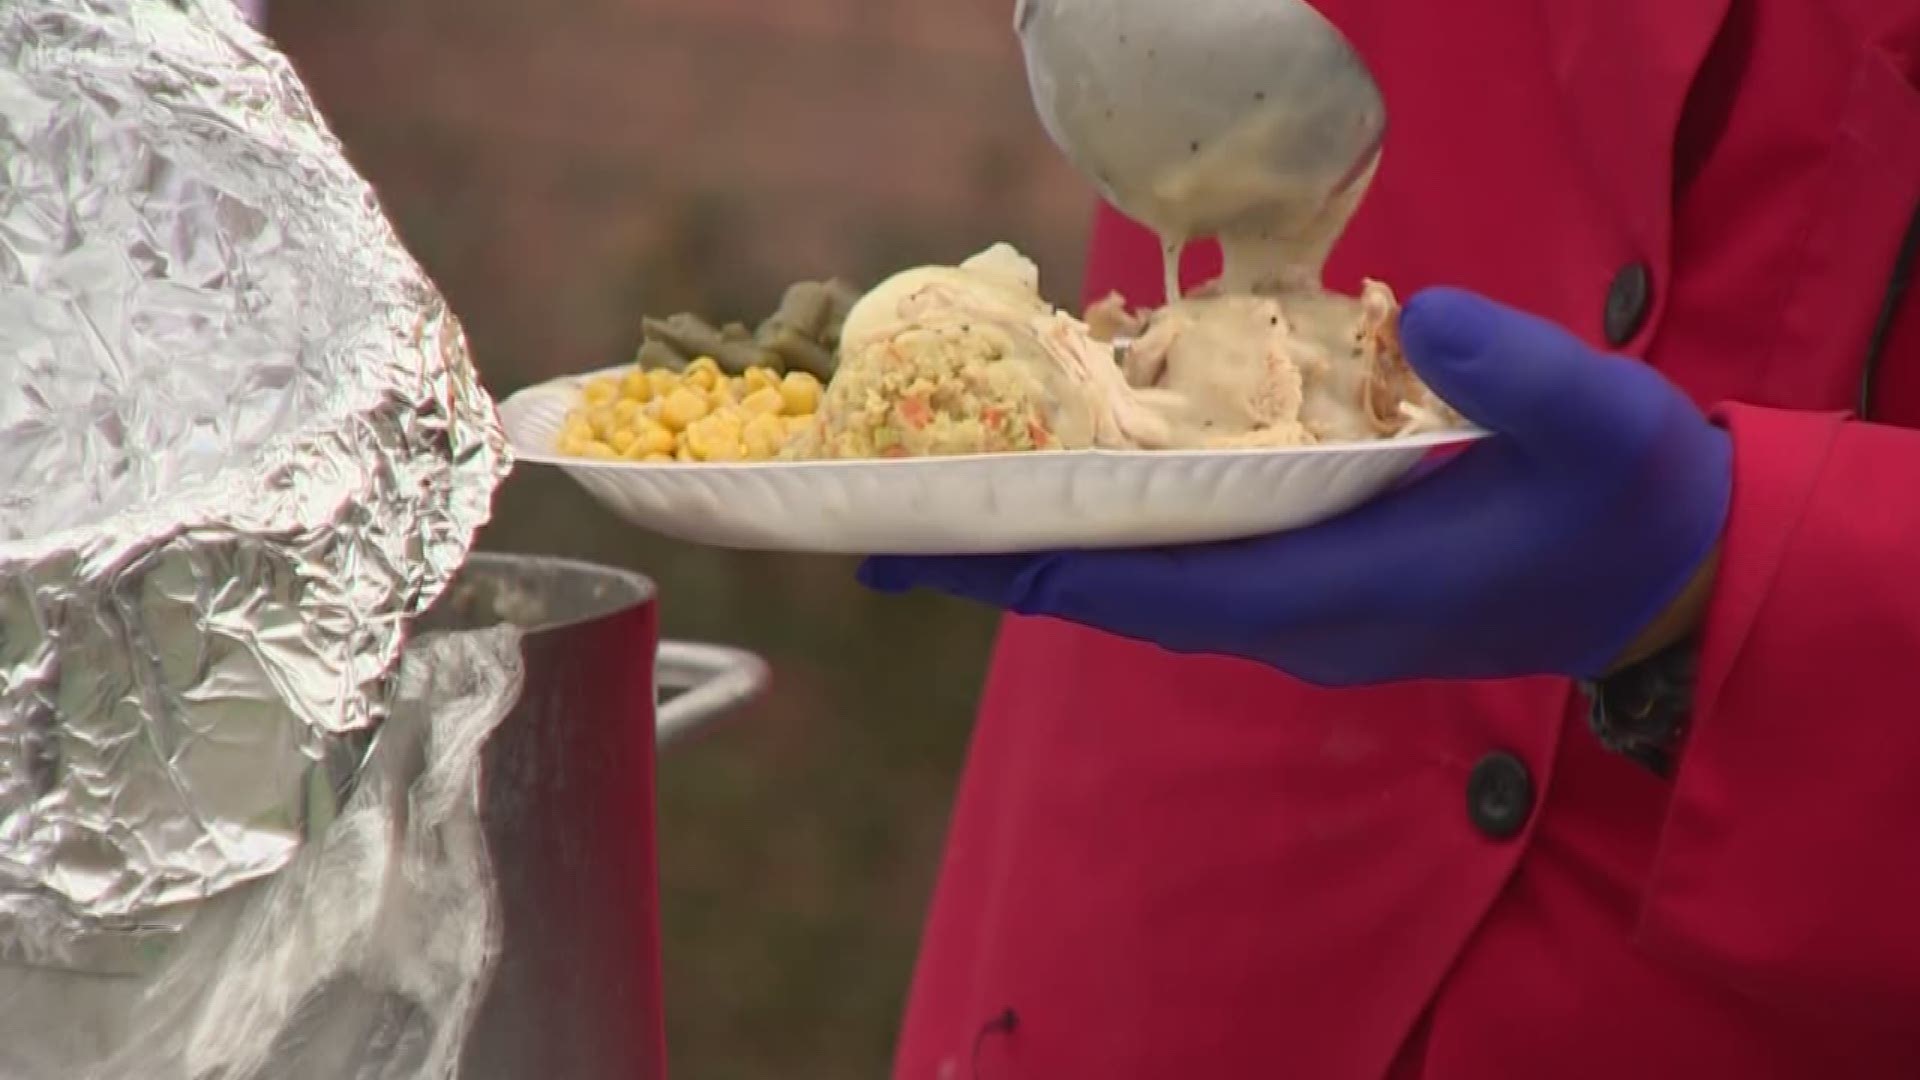 A group of high school students on San Antonio's south side spent their week preparing Thanksgiving meals not for themselves, but those for whom food may be hard to come by this holiday season.